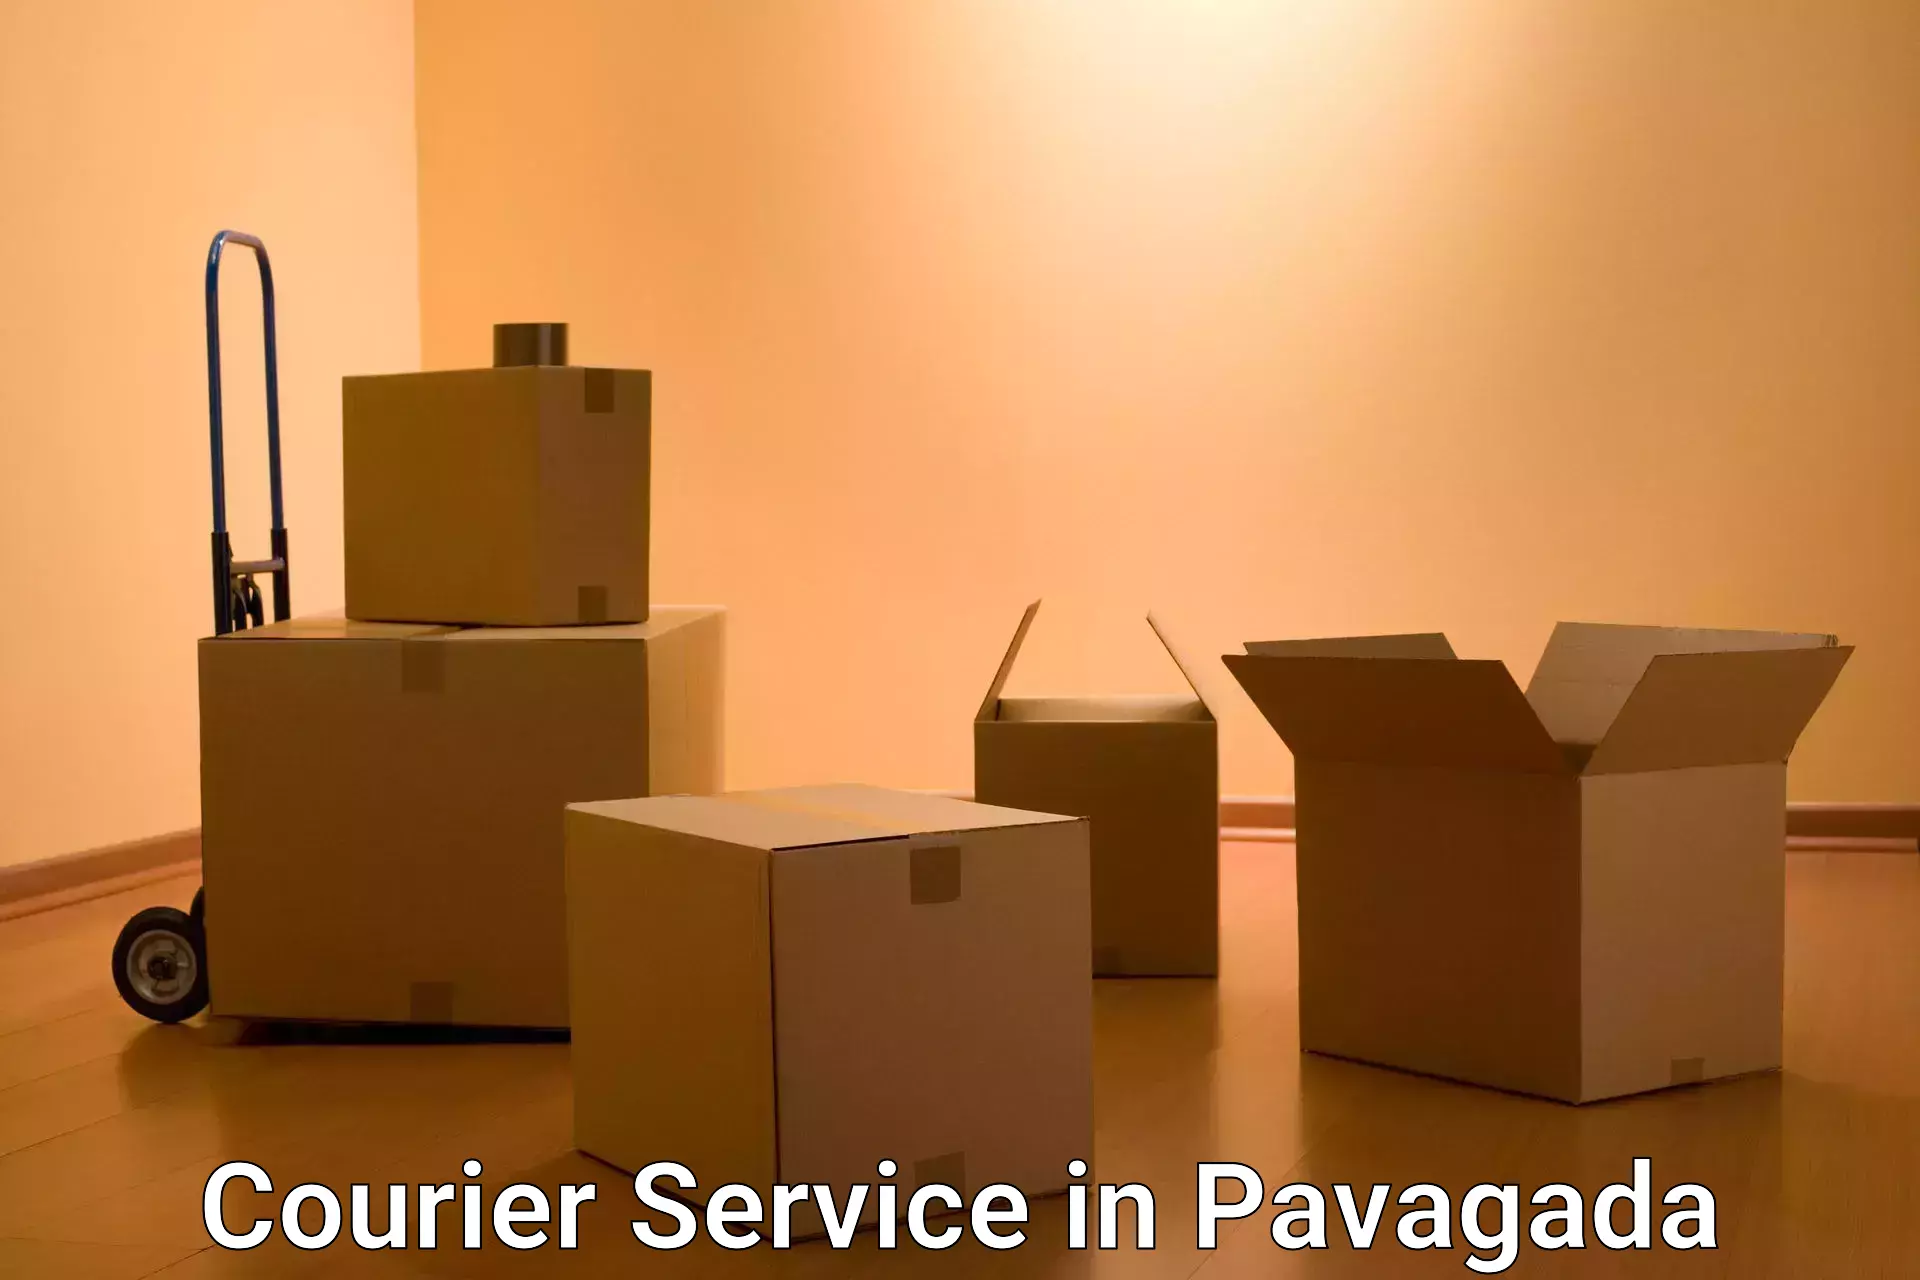 Sustainable shipping practices in Pavagada